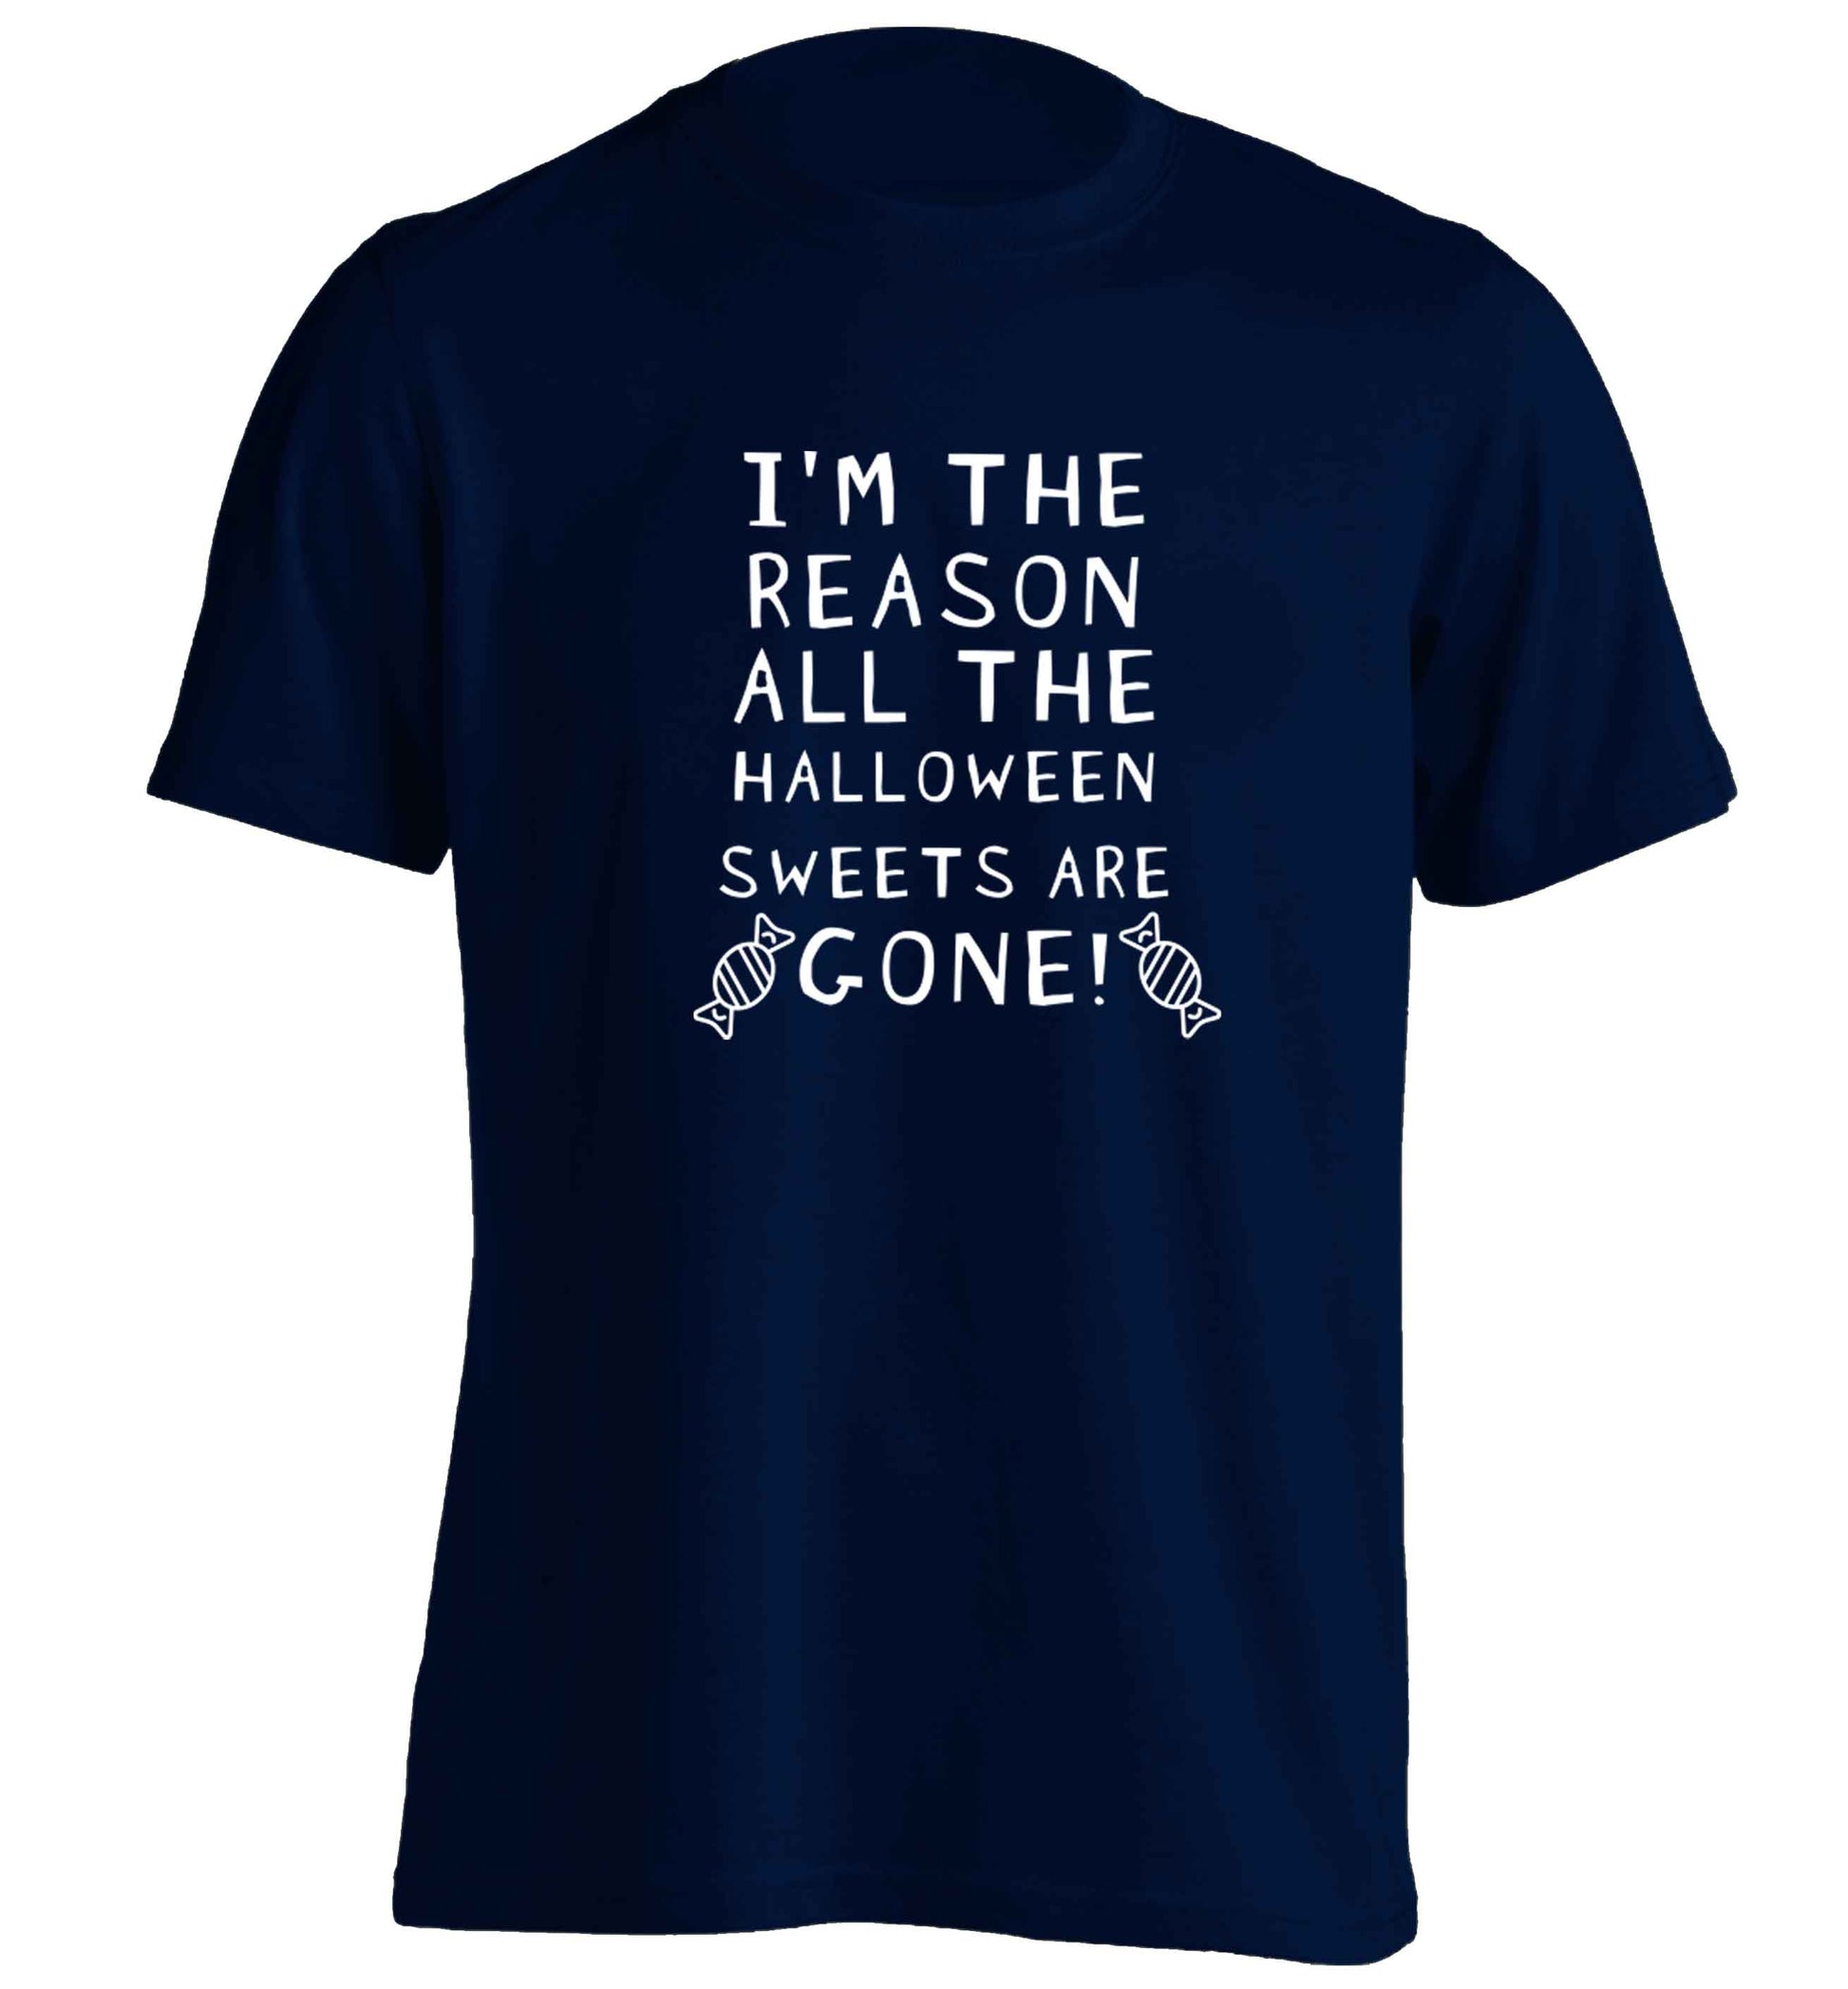 I'm the reason all of the halloween sweets are gone adults unisex navy Tshirt 2XL